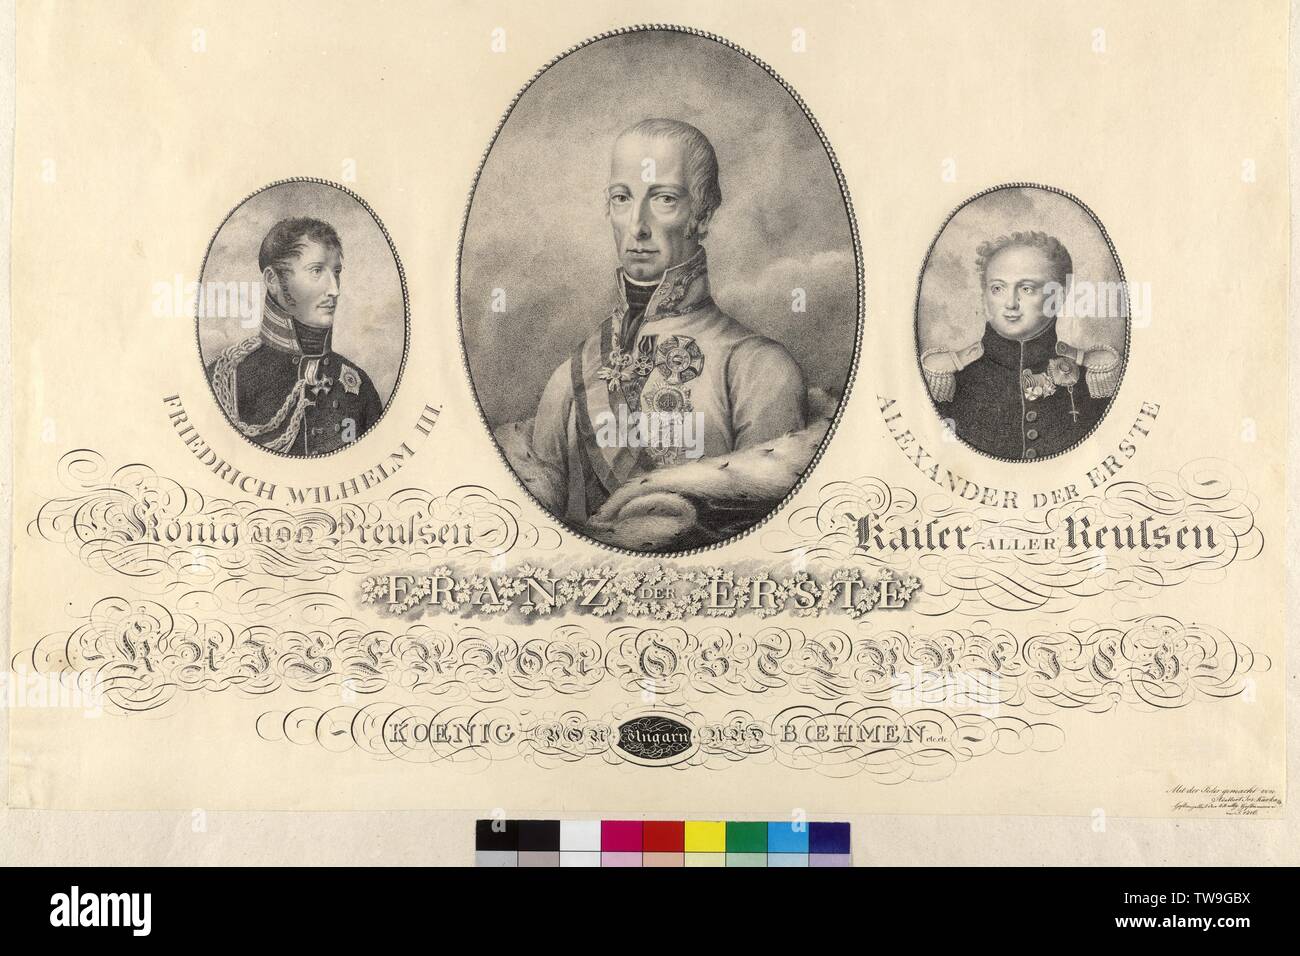 The three allies monarch, portrait of the since the war of liberations 1813 / 14 allies monarch: Franz I of Austria in the centre, flank von Frederick Wilhelm III of Prussia and Alexander I of Russia, pen drawing by Adalbert Joseph Kurka with calligraphic caption (title), Additional-Rights-Clearance-Info-Not-Available Stock Photo